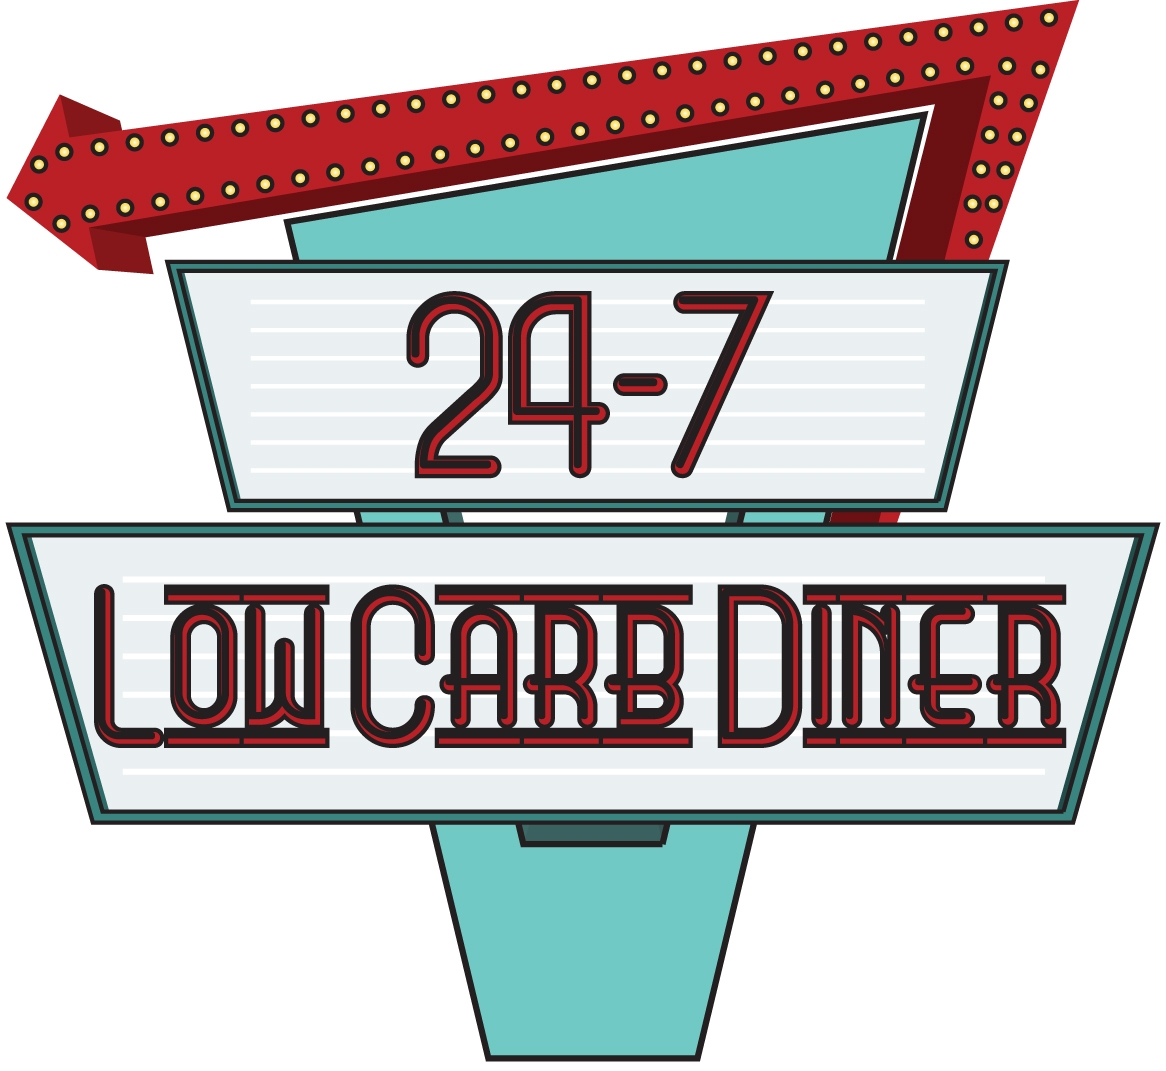 50s Diner Signs Clipart.